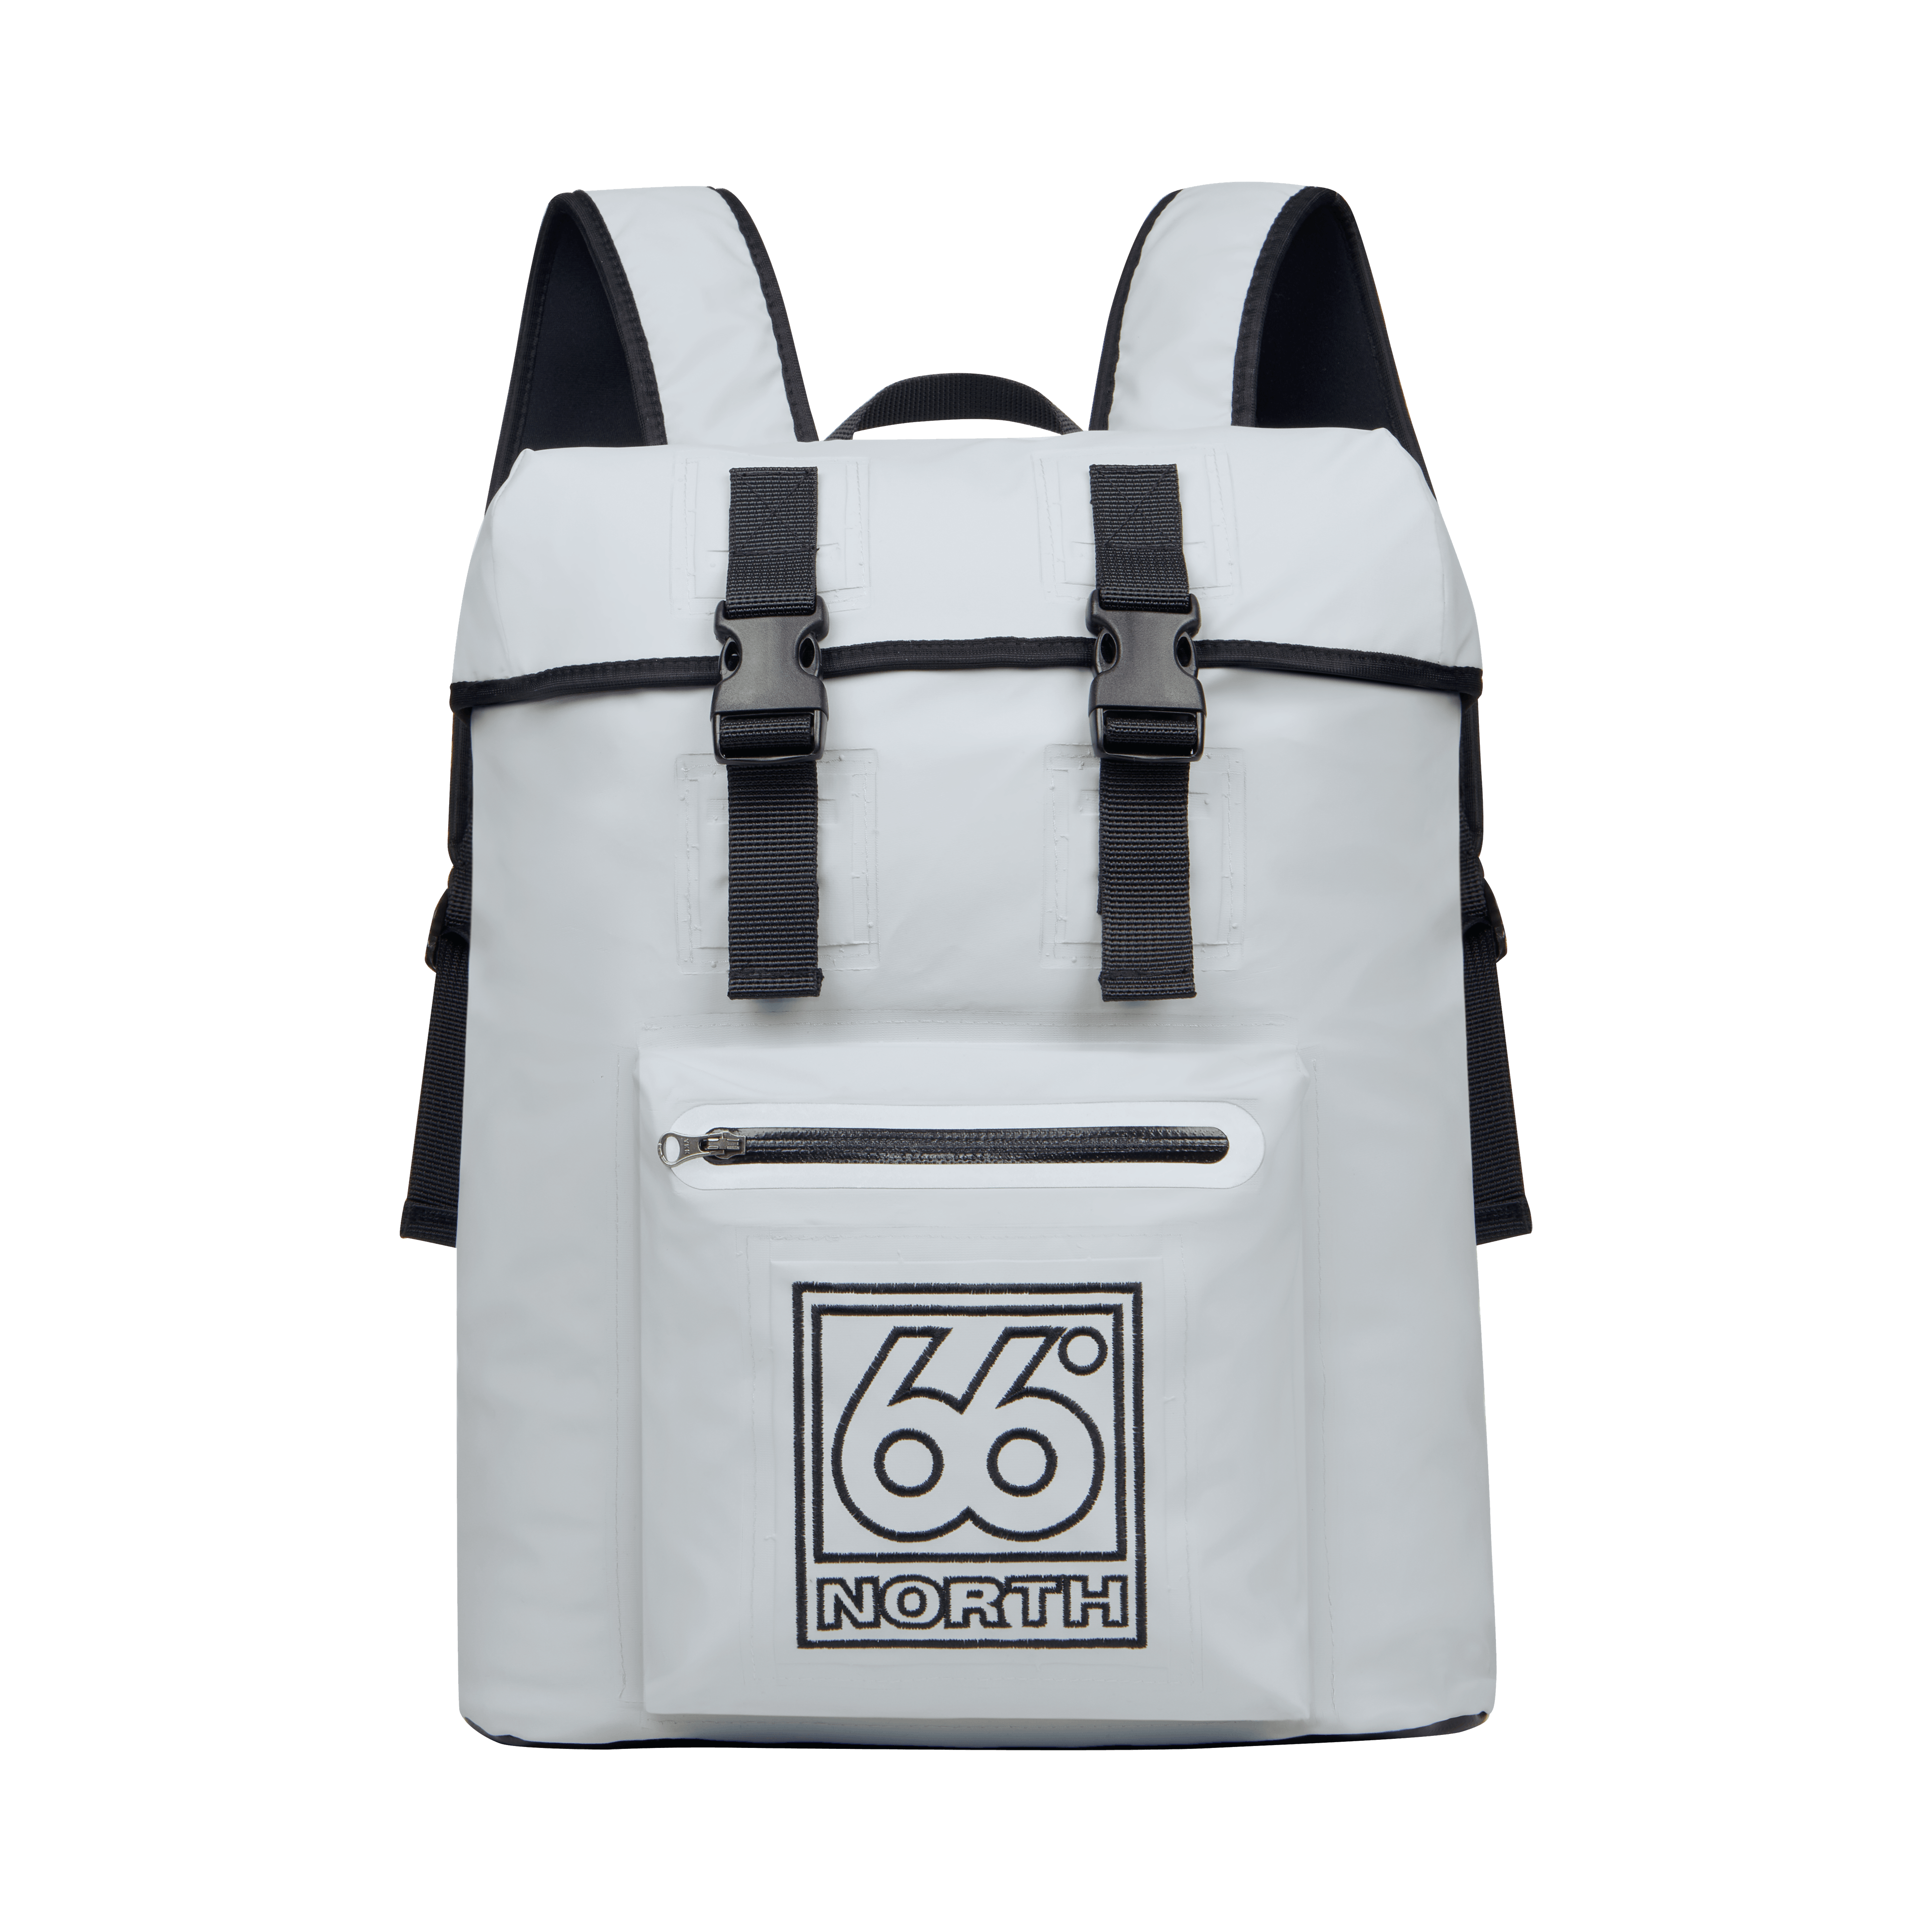 66 North Women's Backpack Accessories - Cloud Grey - One Size